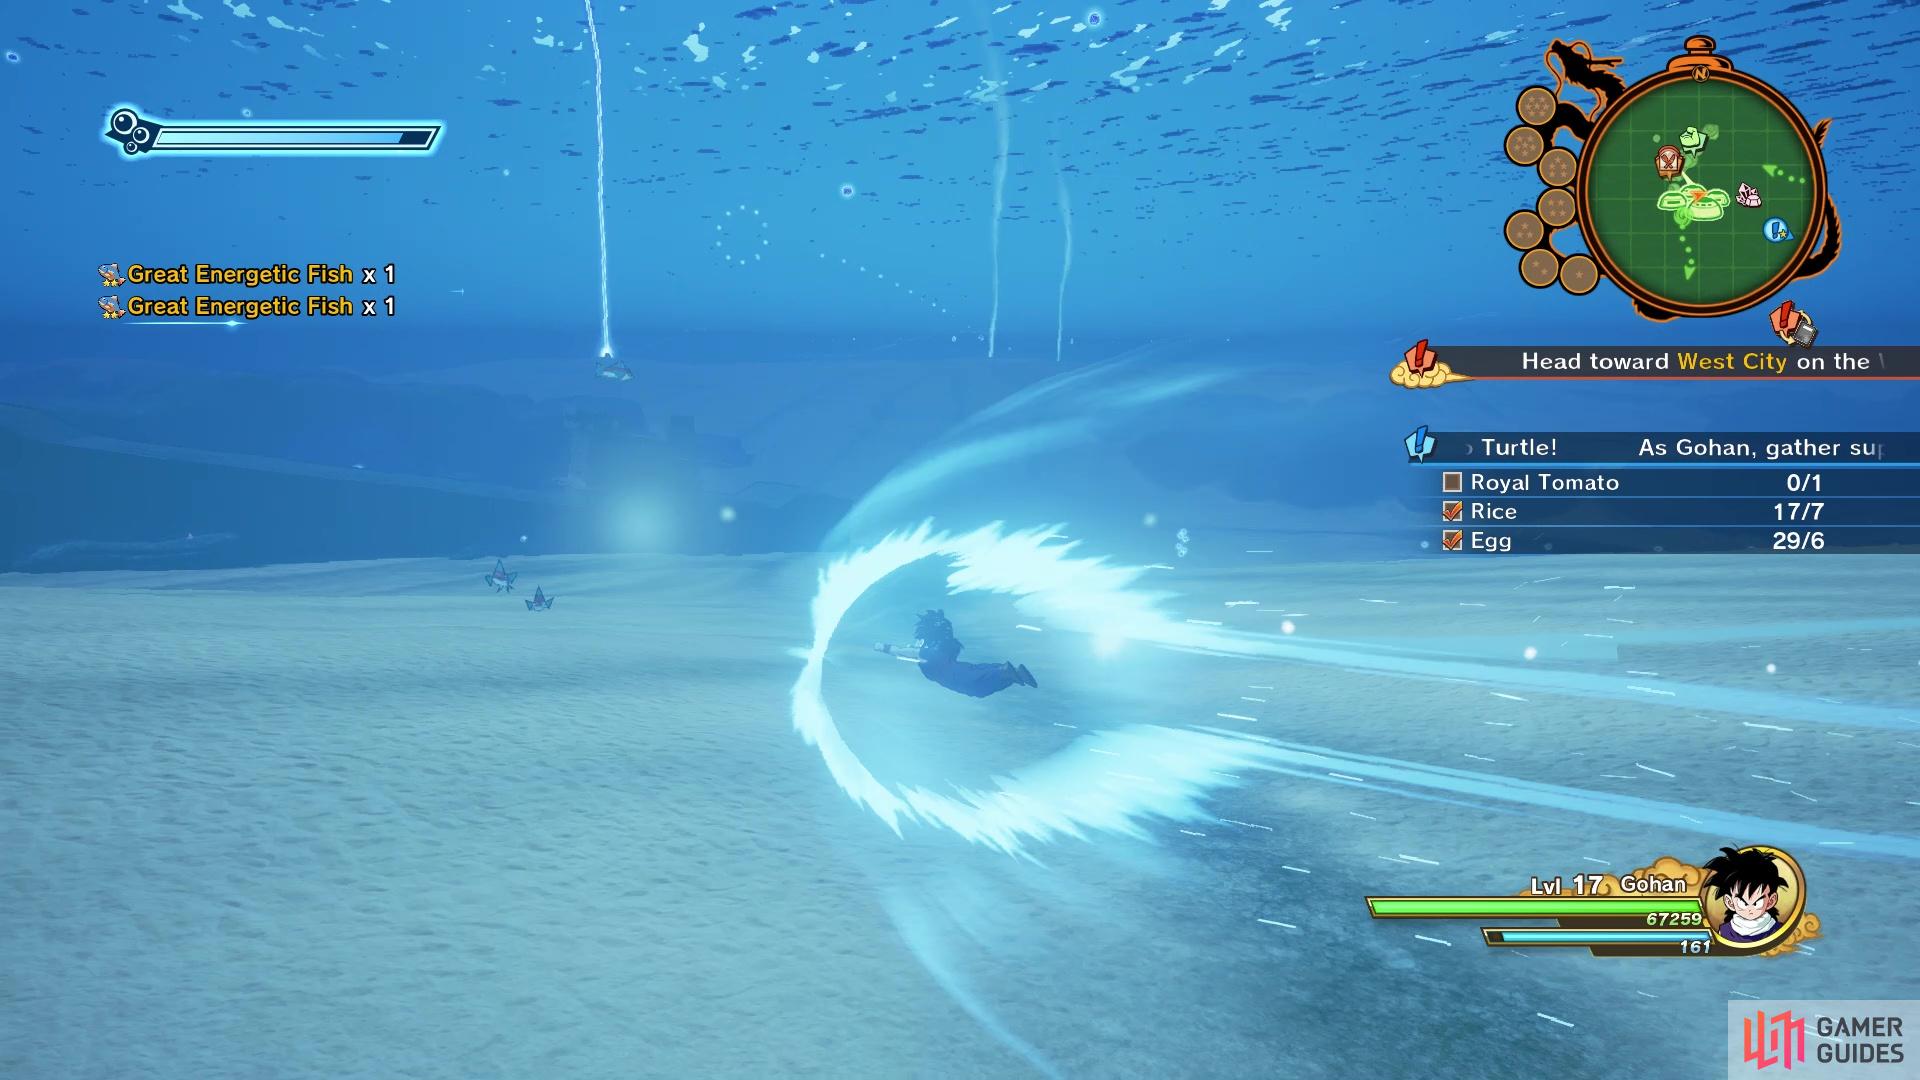 Collect the glowing items underwater near the NPC to get the fish